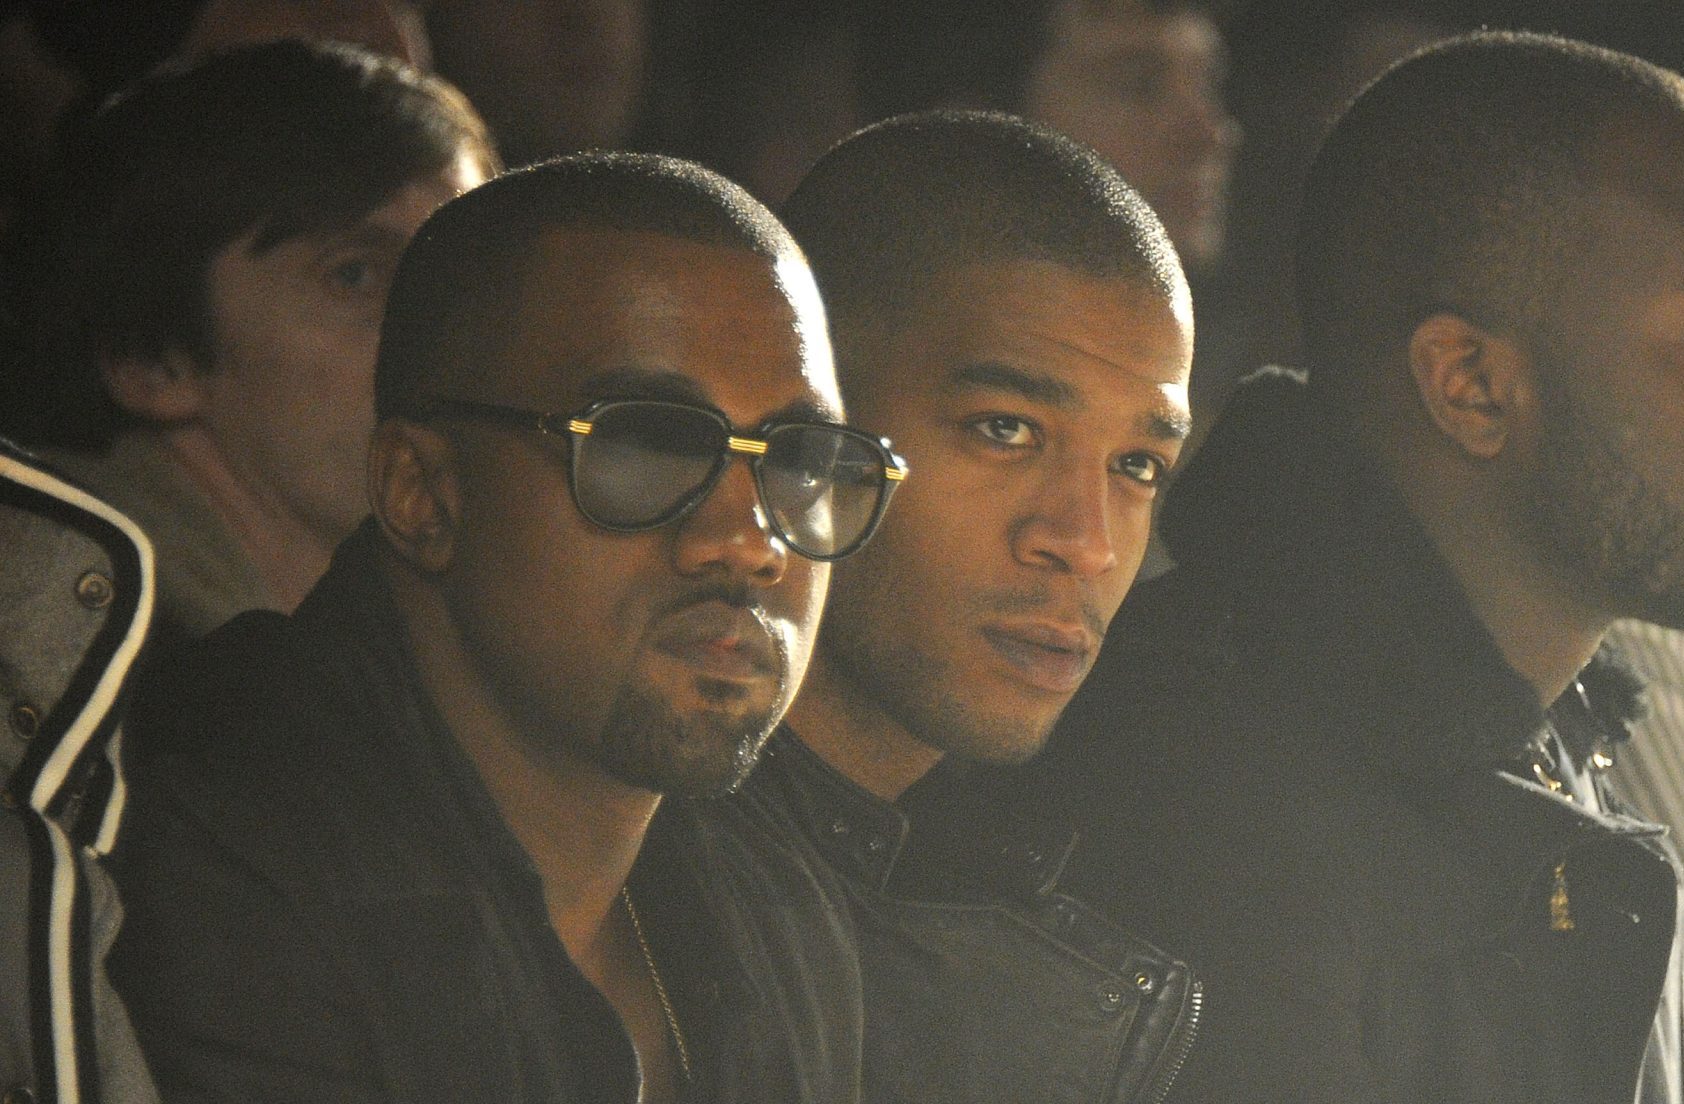 Kid Cudi Confirms The End Of His Friendship And Music Collaborations With Kanye West